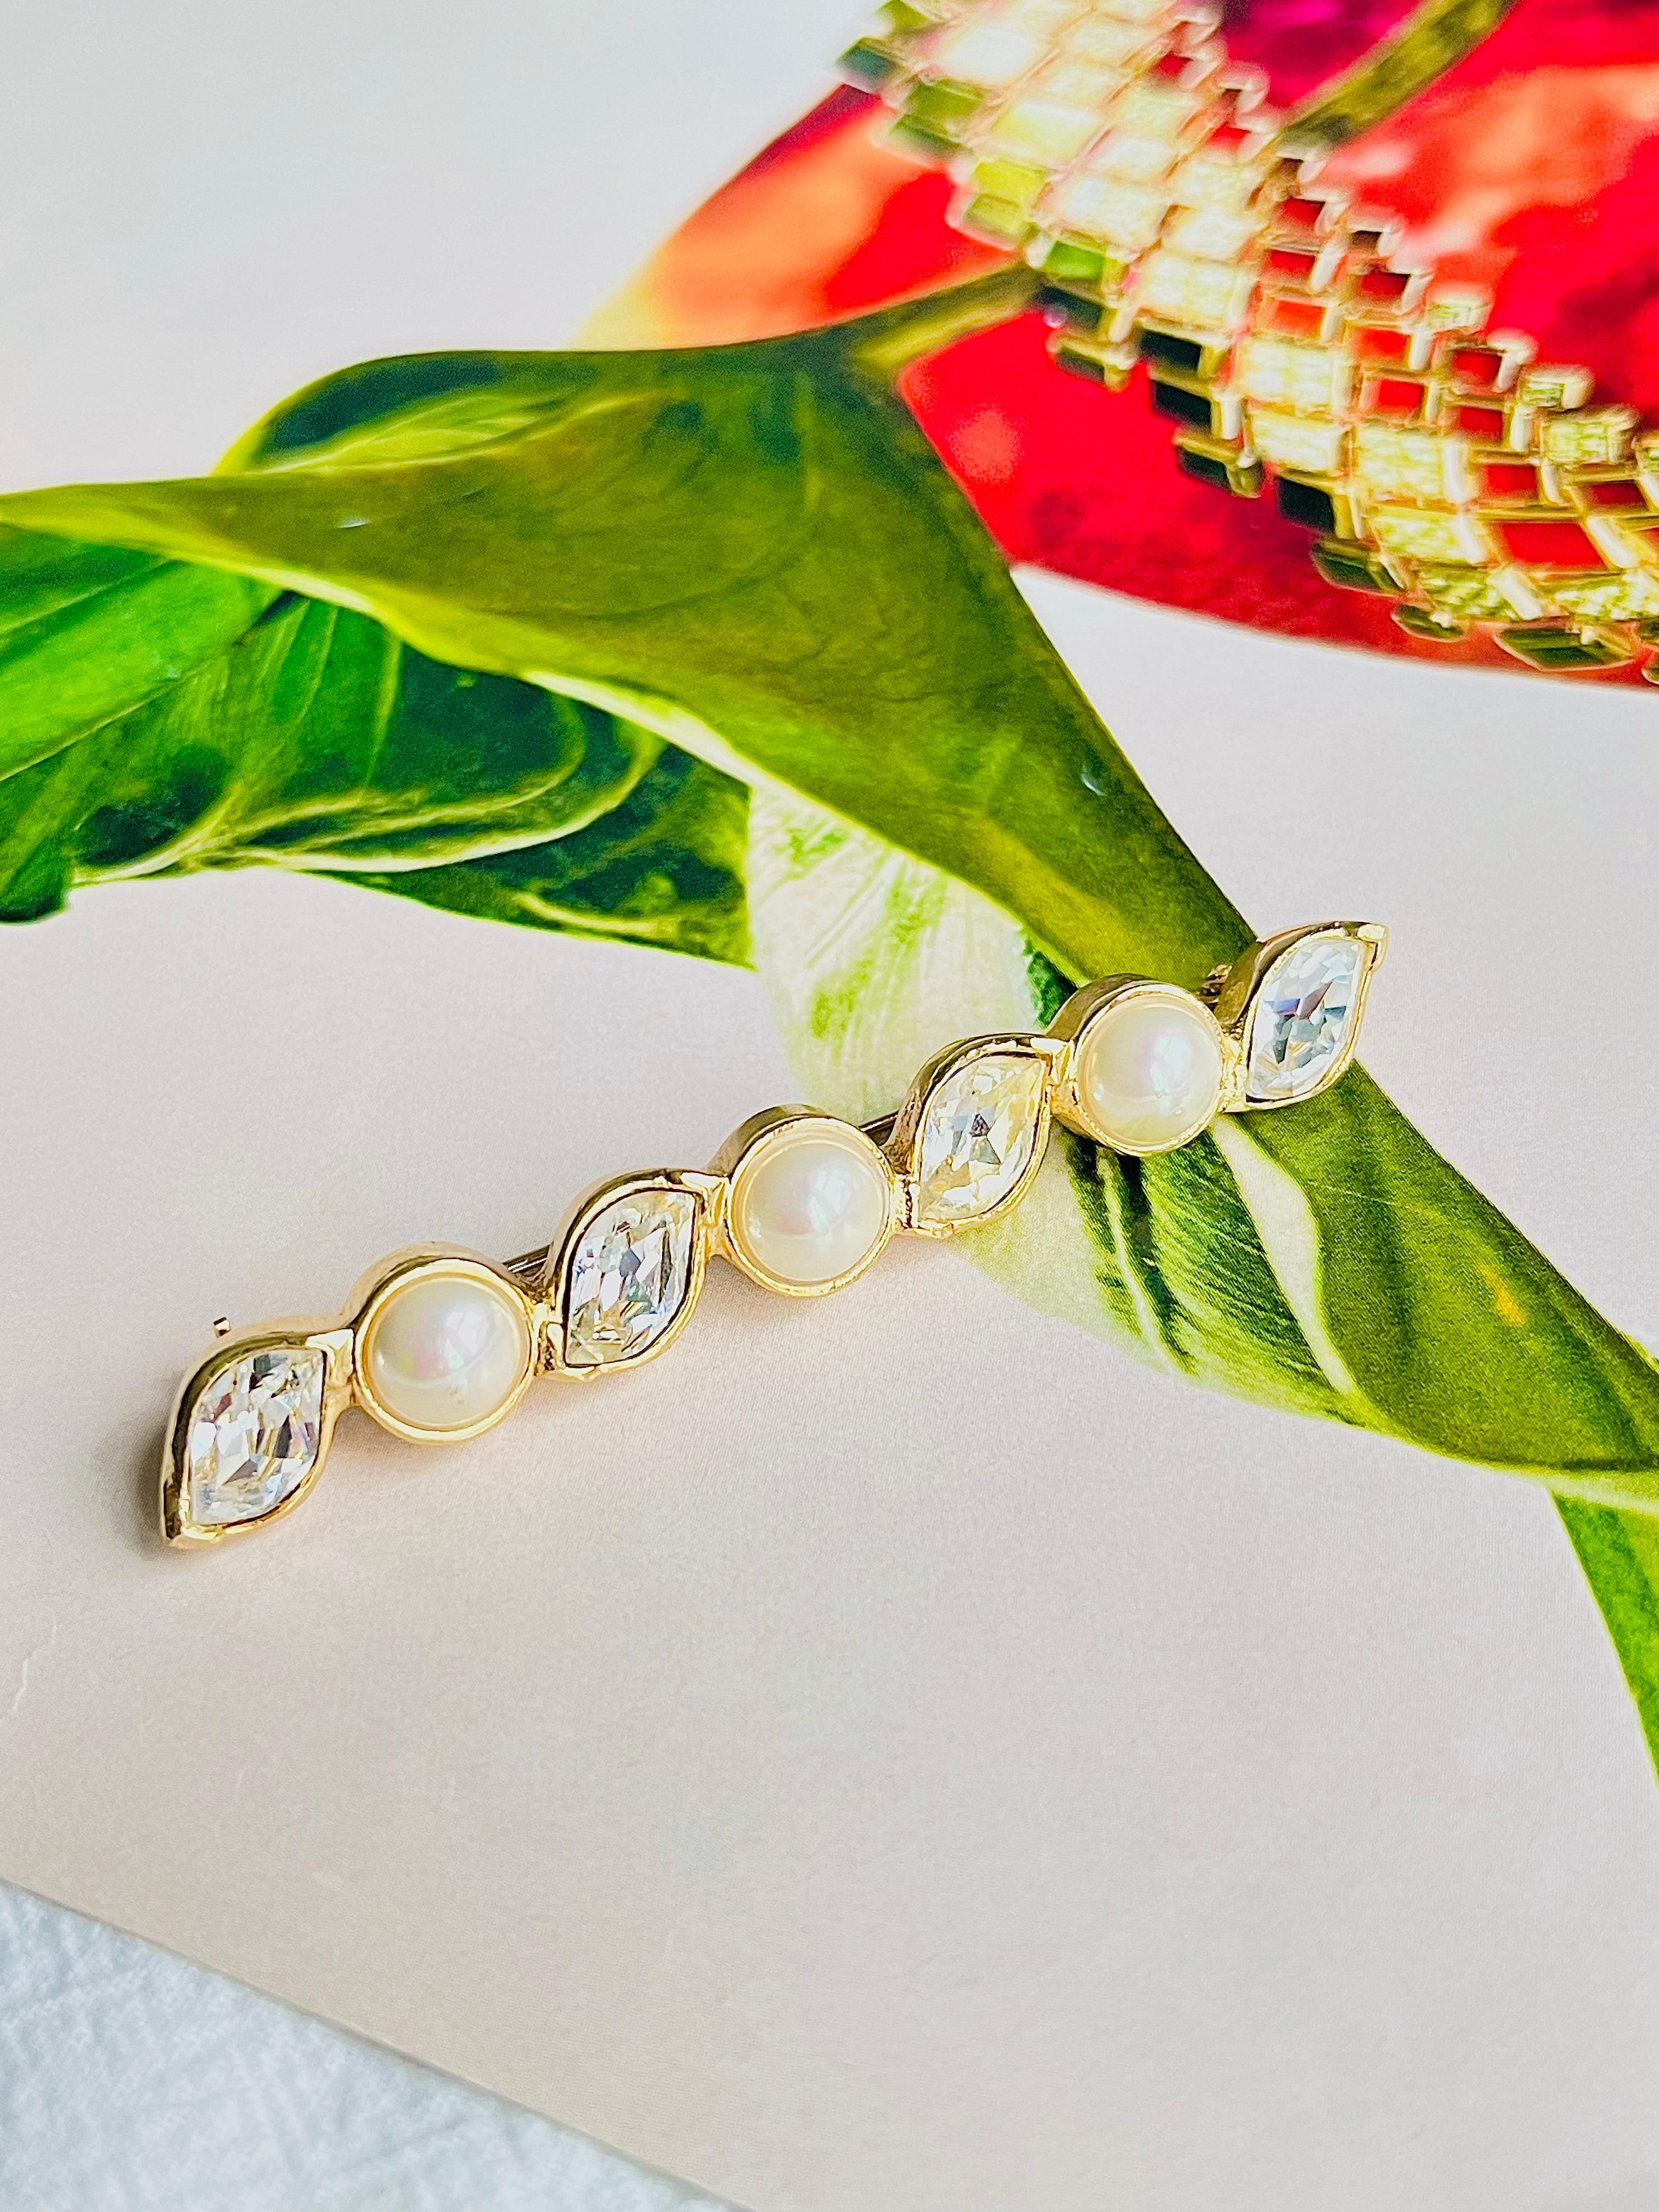 Christian Dior Vintage 1980s Long Bar Leaf Shining Crystals White Pearls Brooch In Excellent Condition For Sale In Wokingham, England